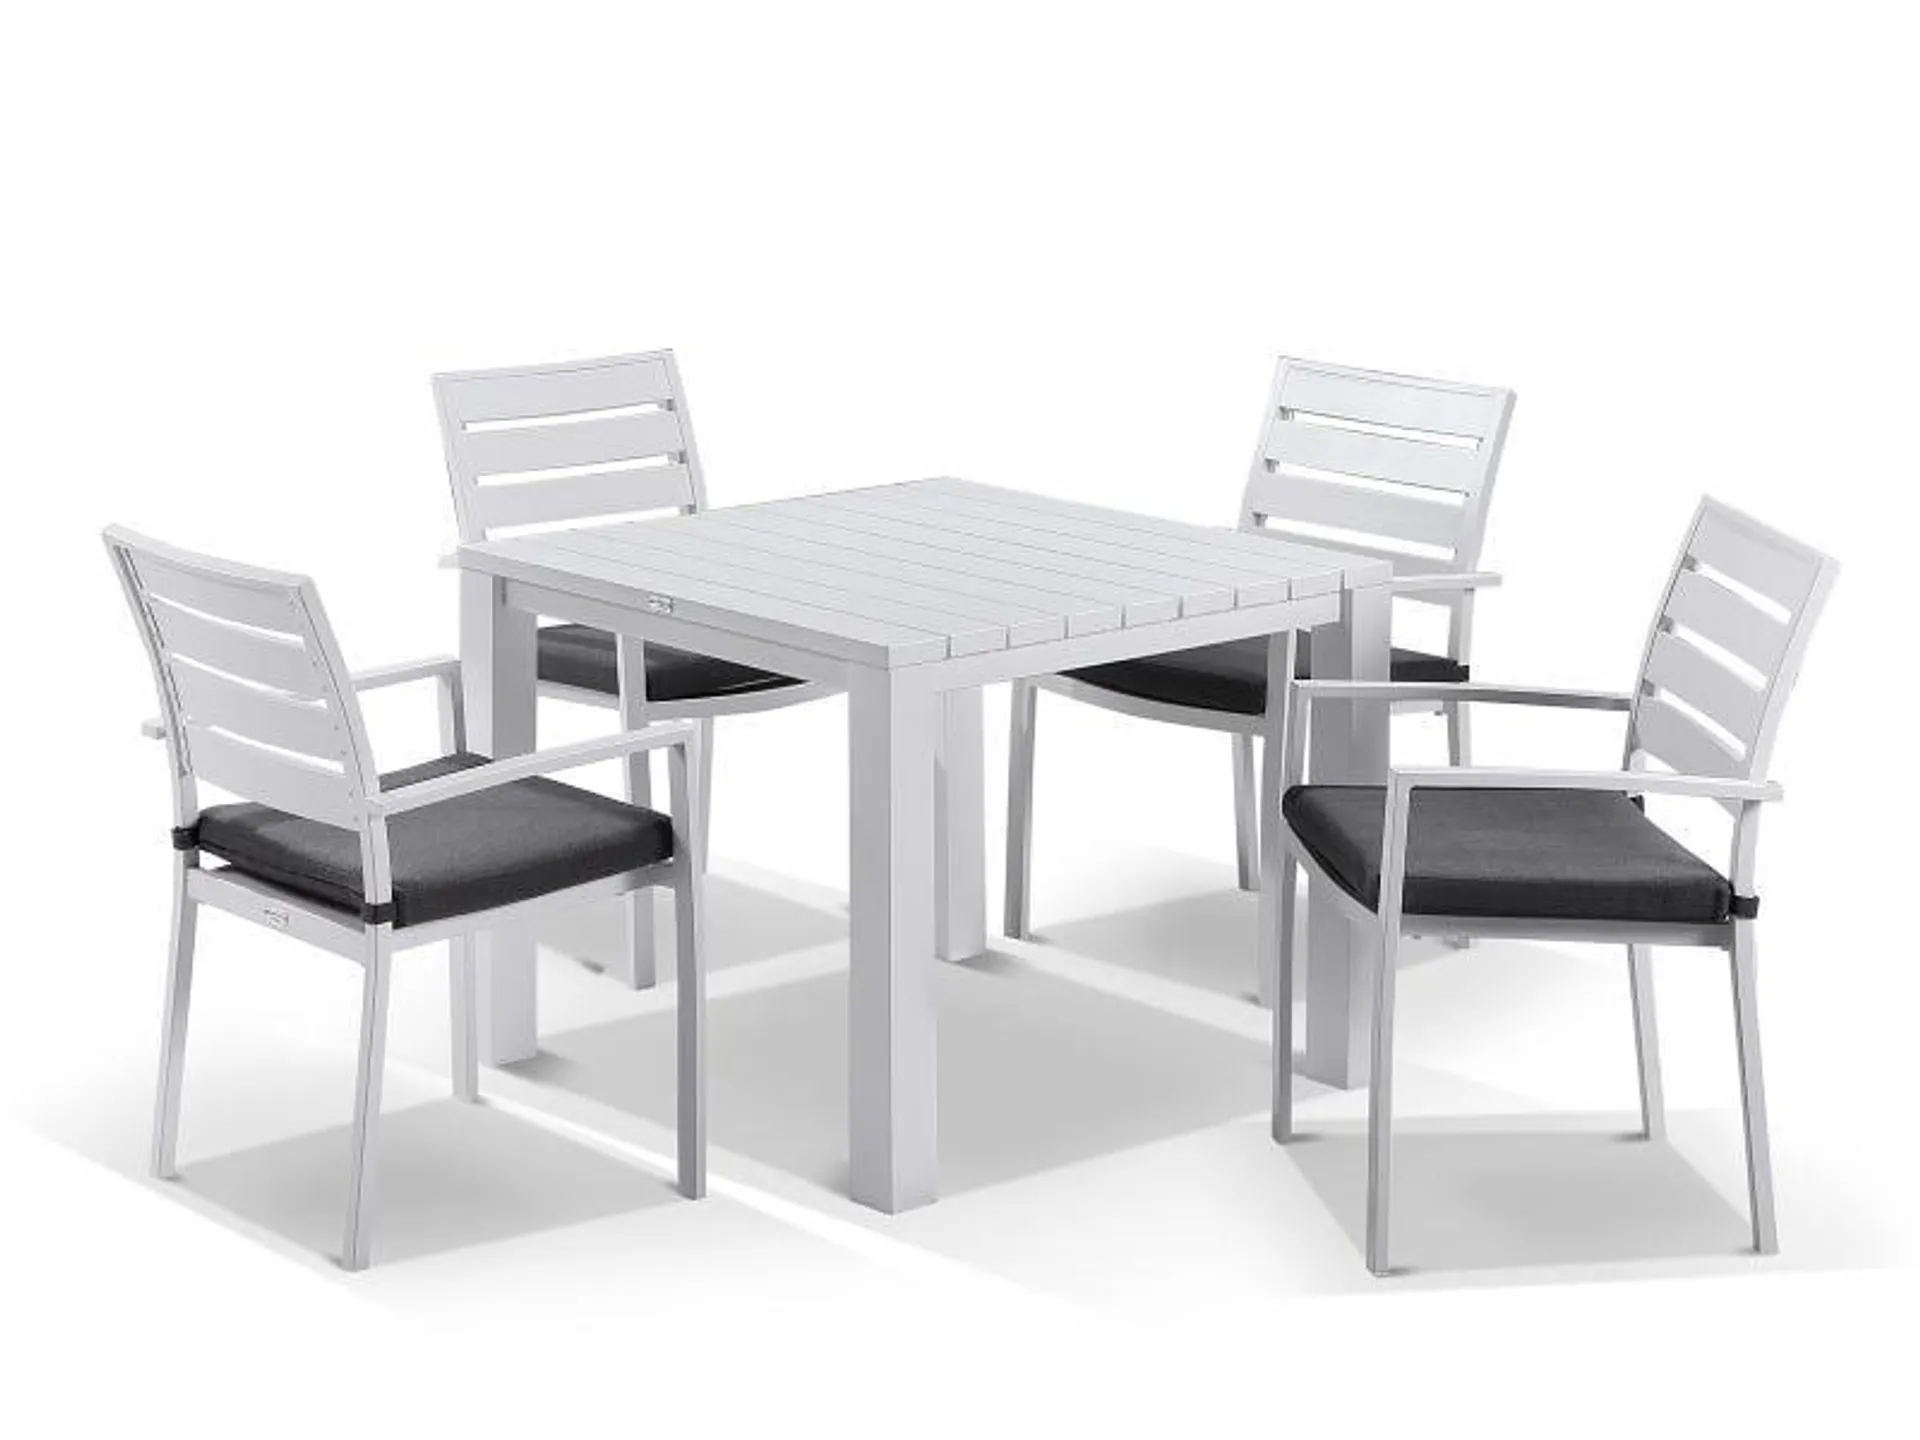 Adele table with Twain Chairs 5pc Outdoor Dining Setting